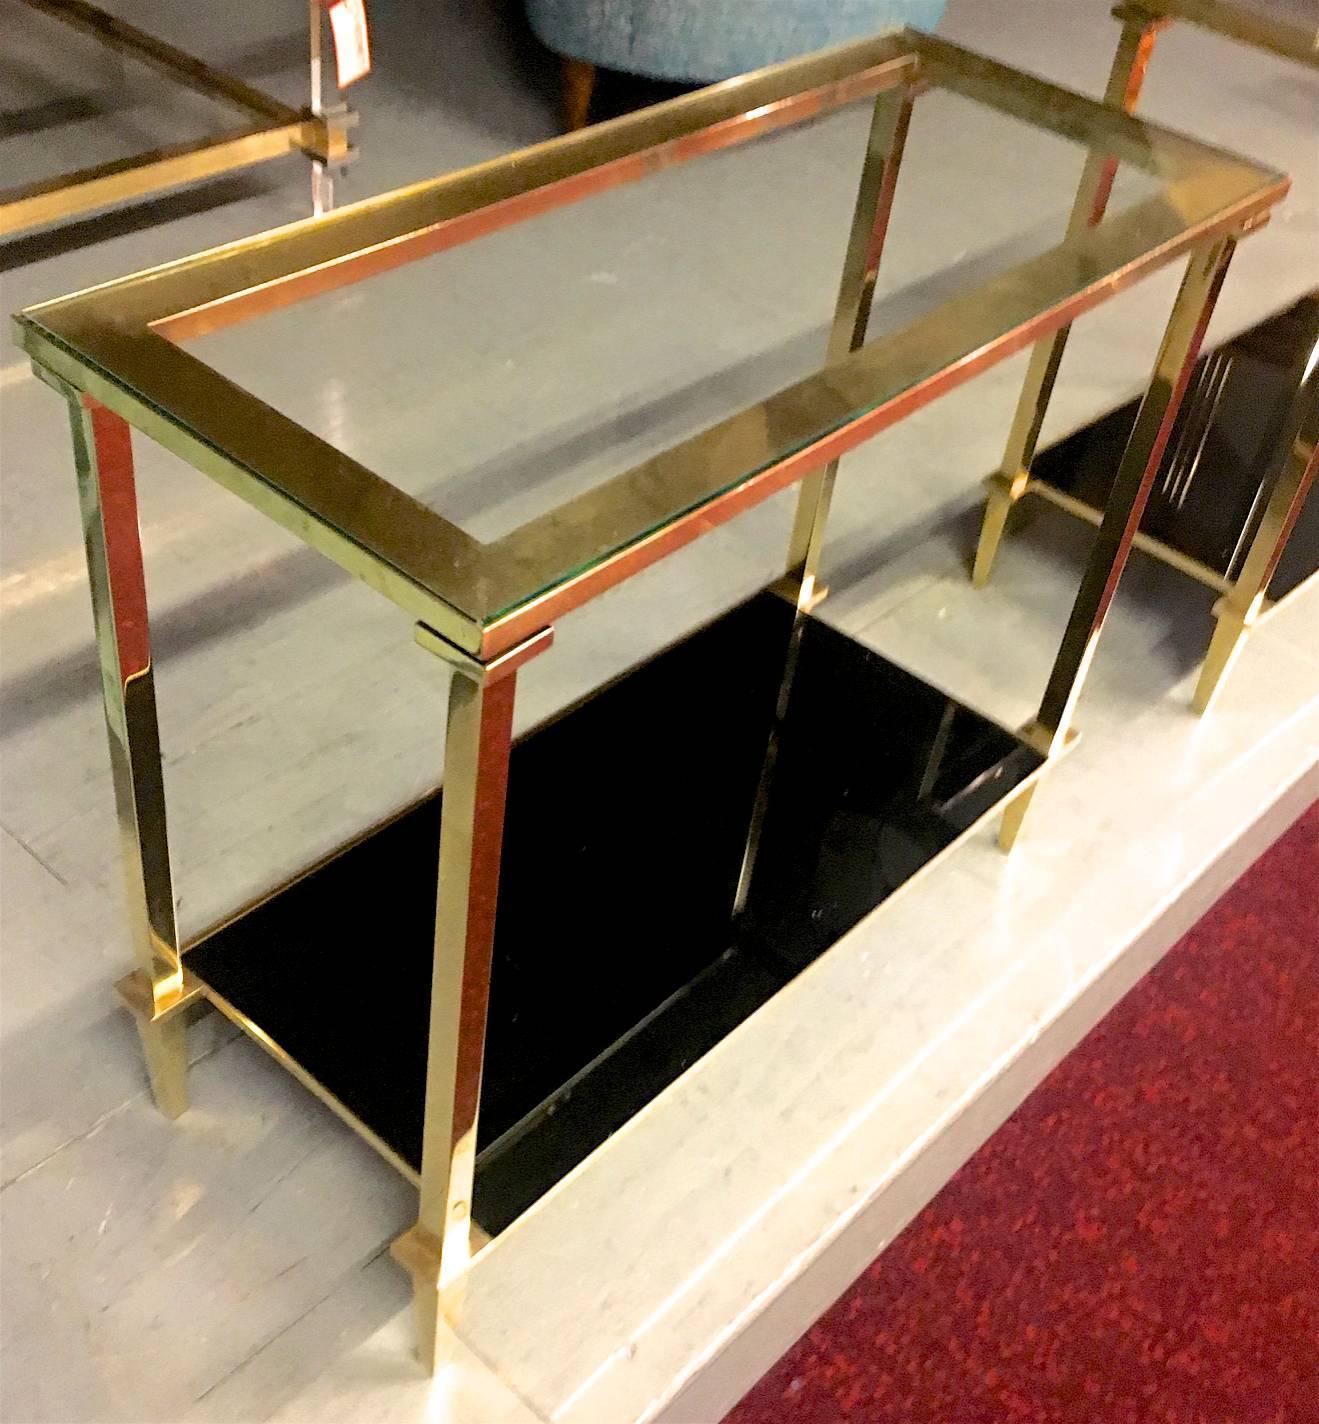 Refined pair of two tiers side tables with bronze pure hardware.